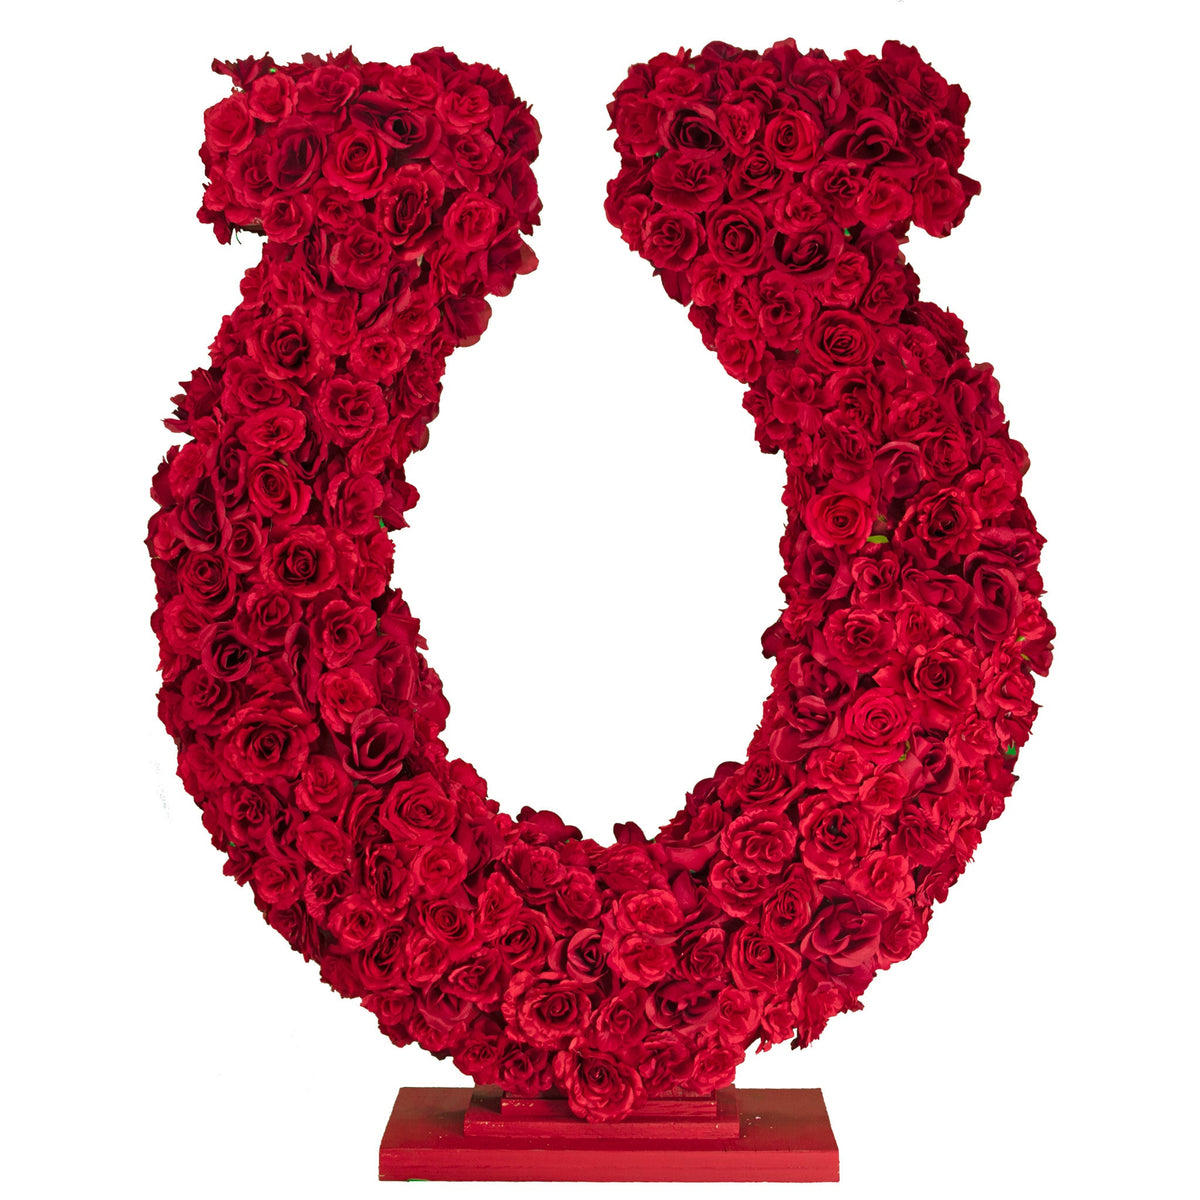 40in tall Rose Petal Horseshoe Centerpiece and Tabletop Display made with artificial rosebud flowers on a foam core and a wooden base painted in red.